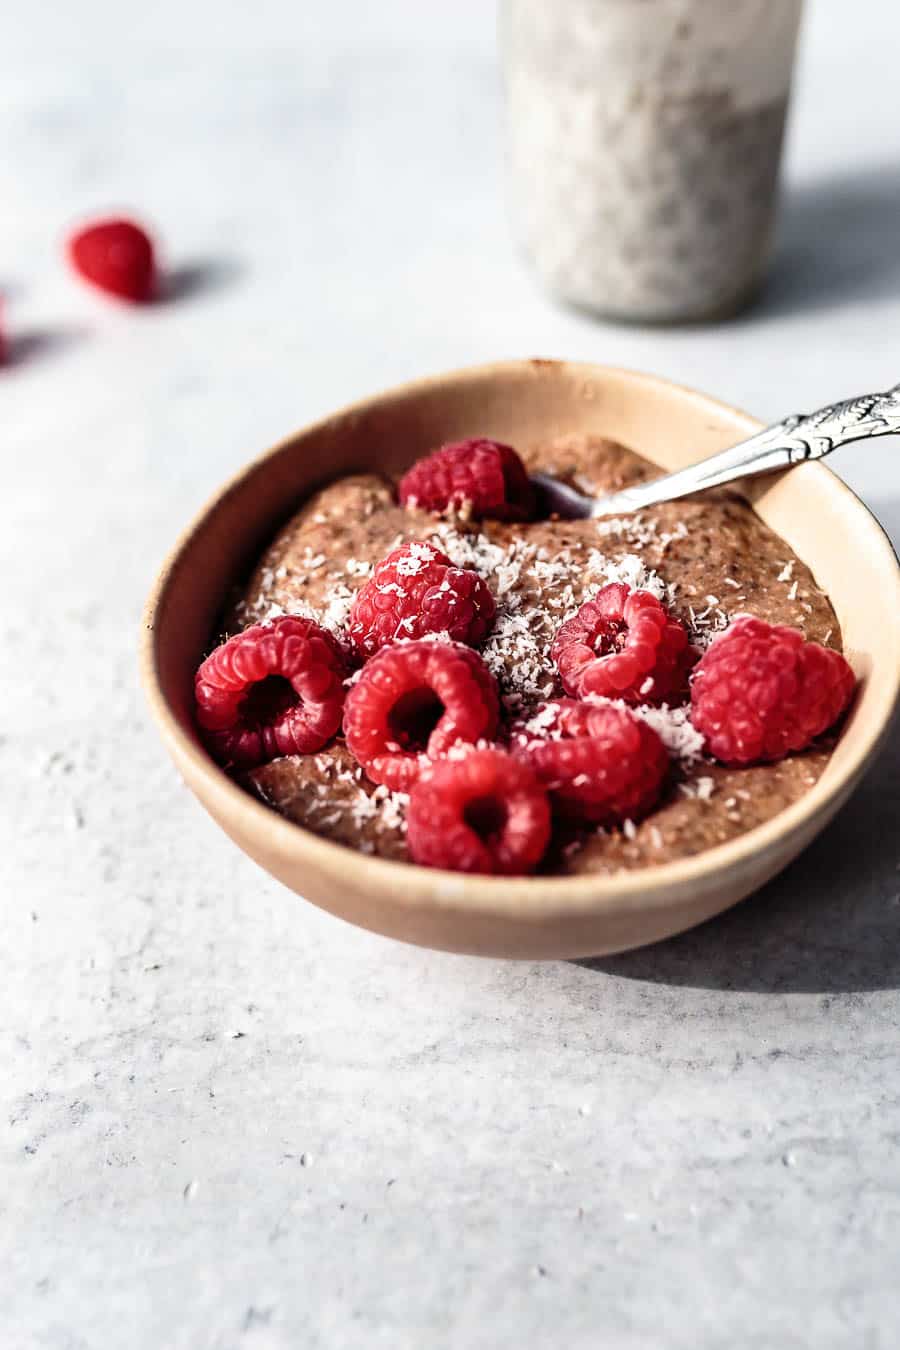 Blended chocolate chia pudding in a clay bowl on a white counter top. The pudding is topped with raspberries and desiccated coconut. There is a silver spoon sitting inside the bowl a jar of soaking chia seeds on the counter top.